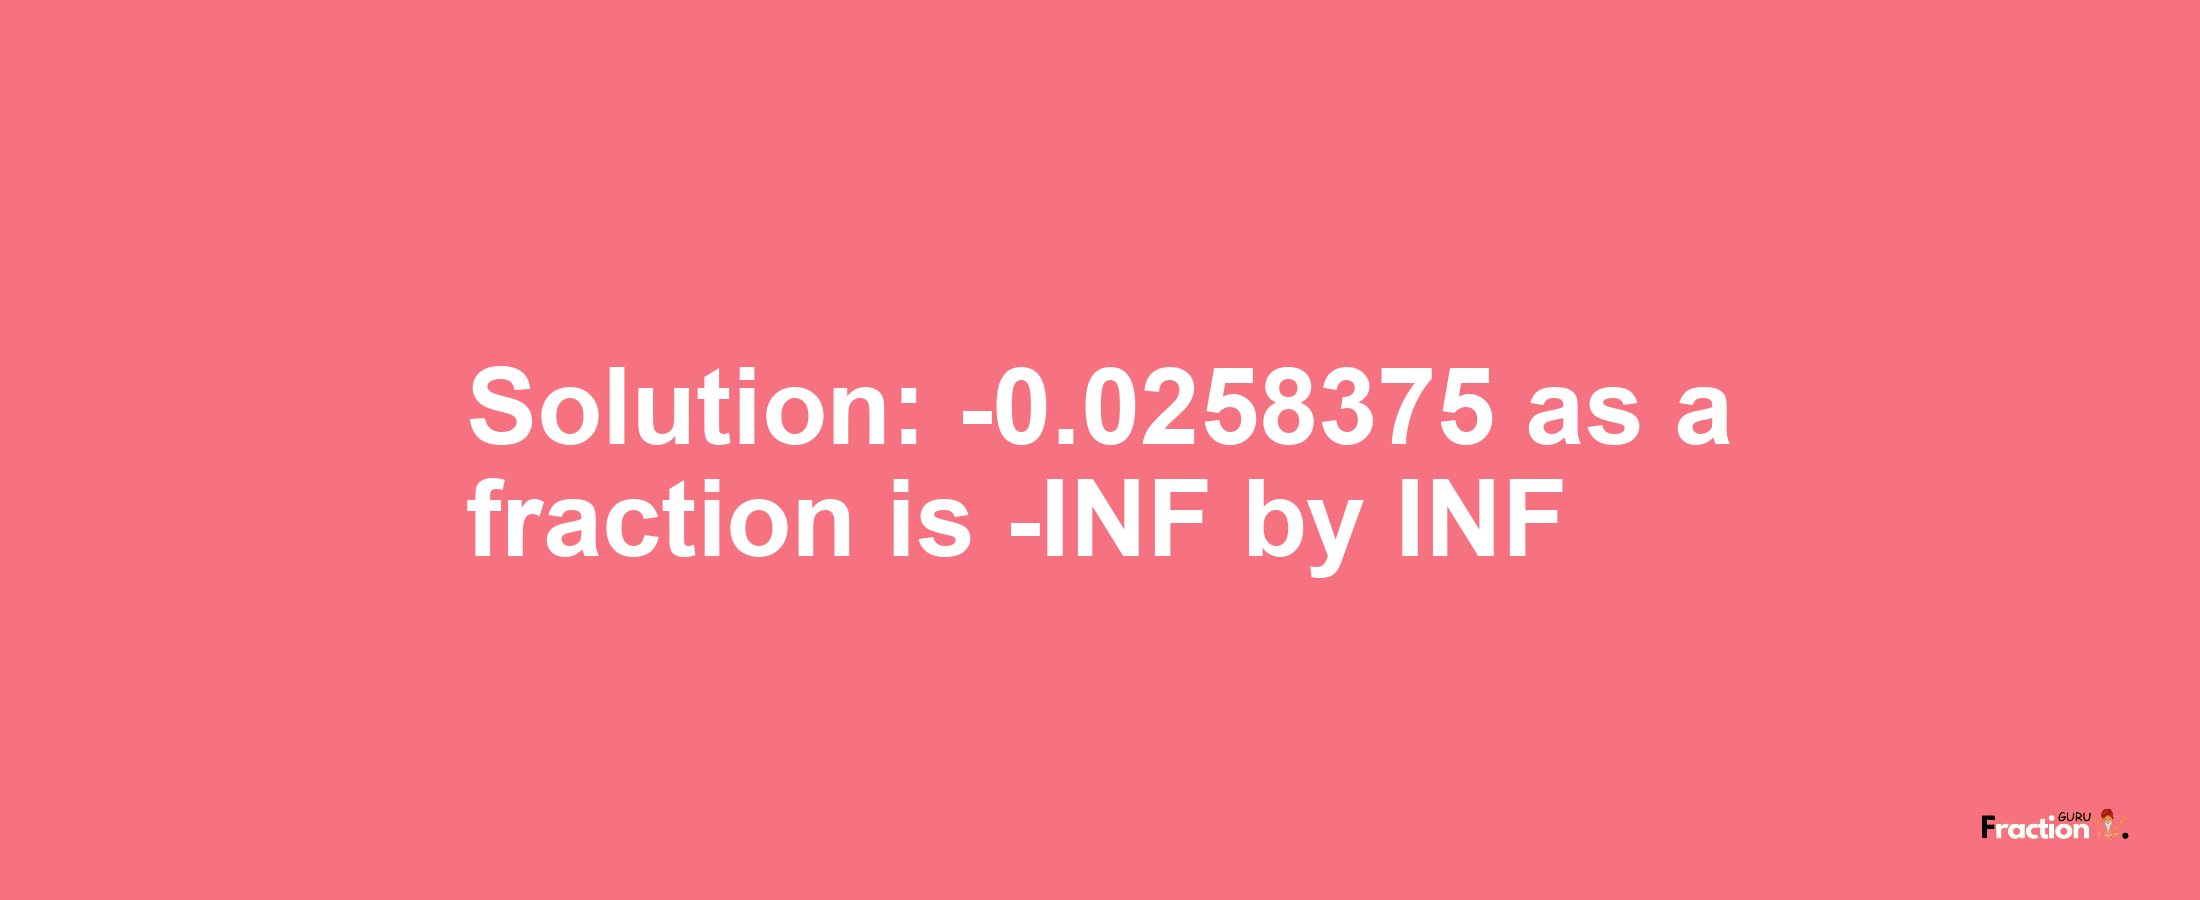 Solution:-0.0258375 as a fraction is -INF/INF